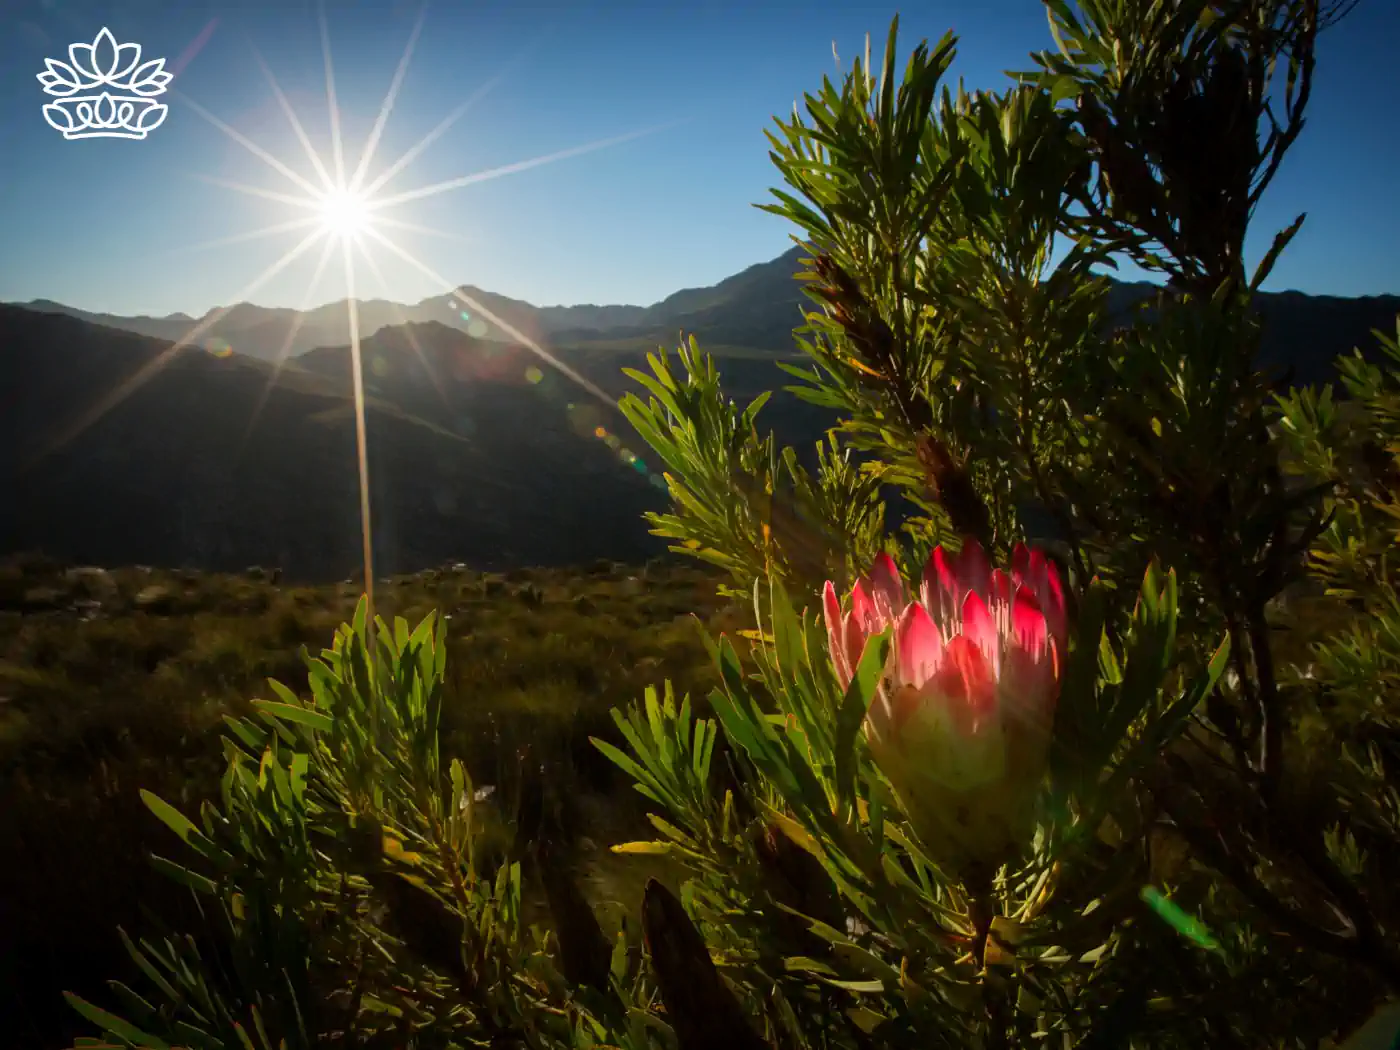  Sunrise over a field of Protea flowers in bloom - Fabulous Flowers and Gifts, Proteas Collection